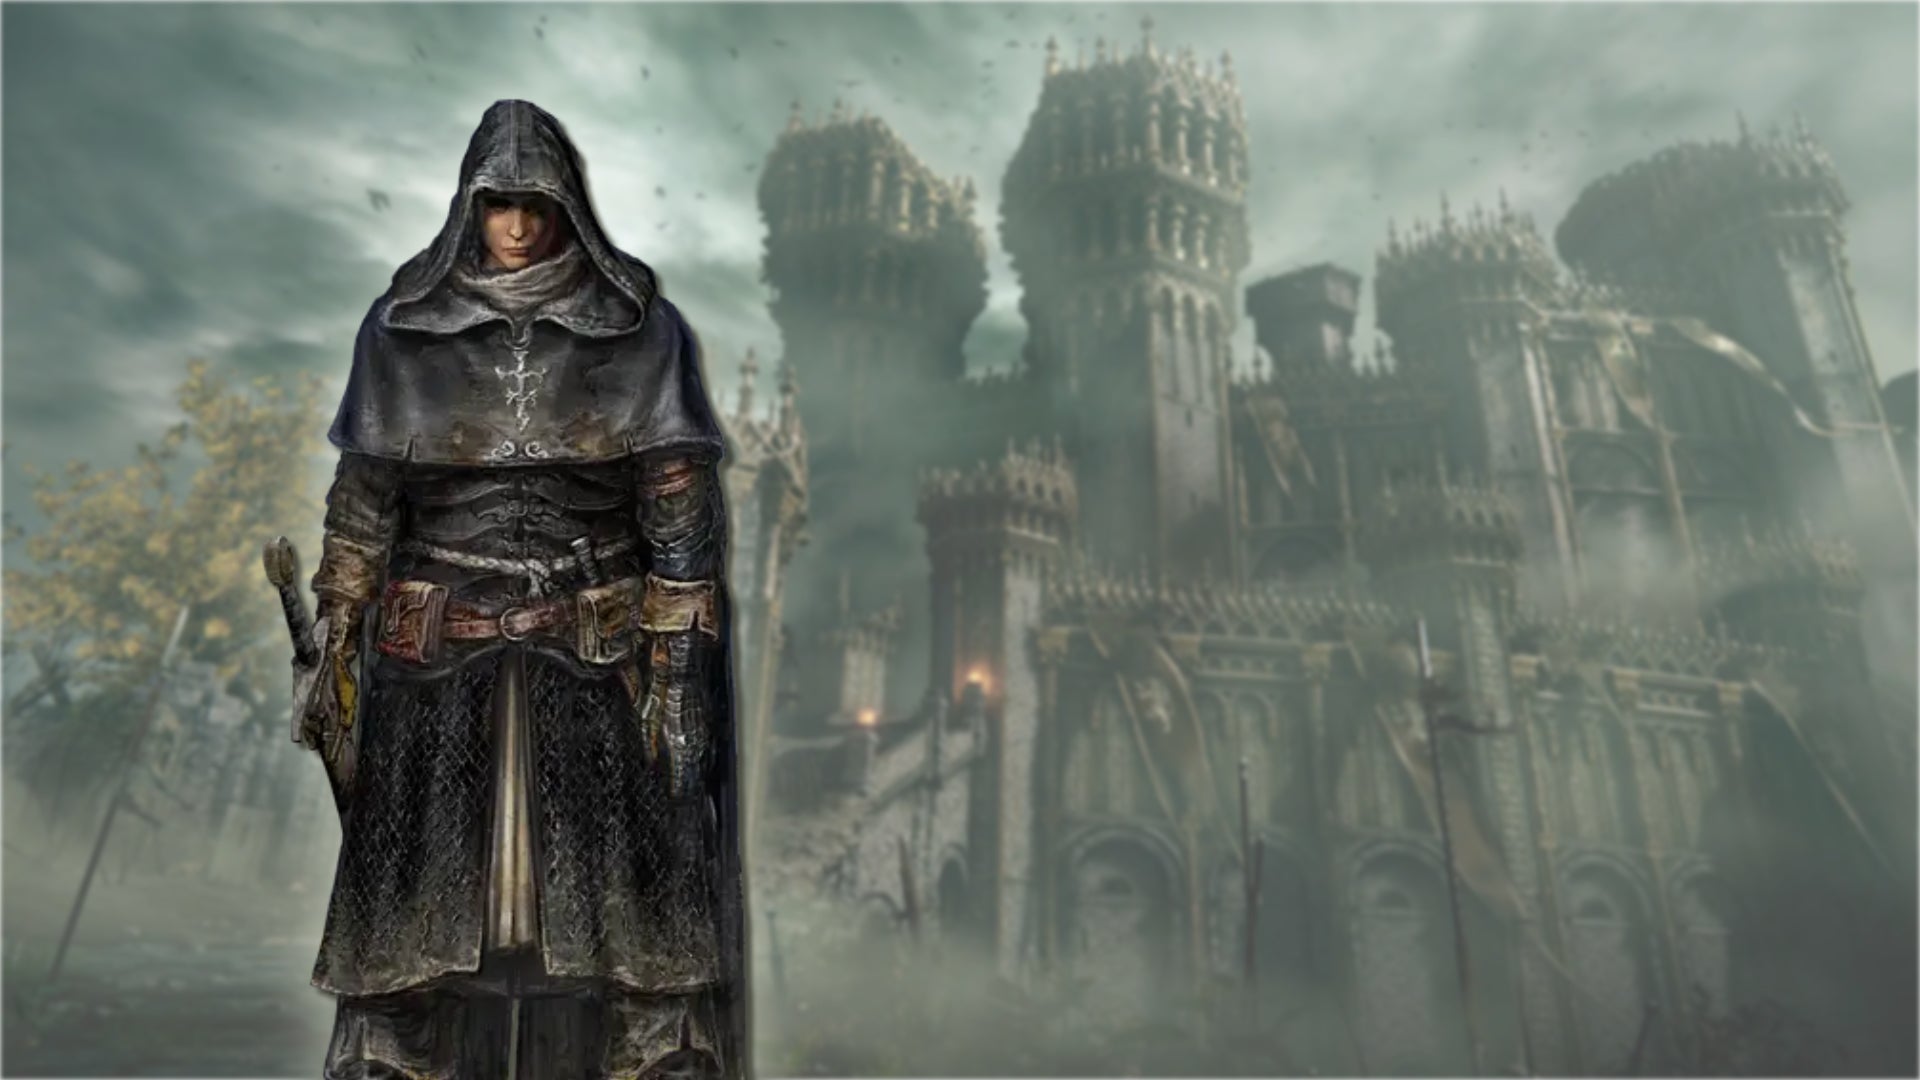 A portrait of the Confessor class in Elden Ring, against a gothic castle backdrop.